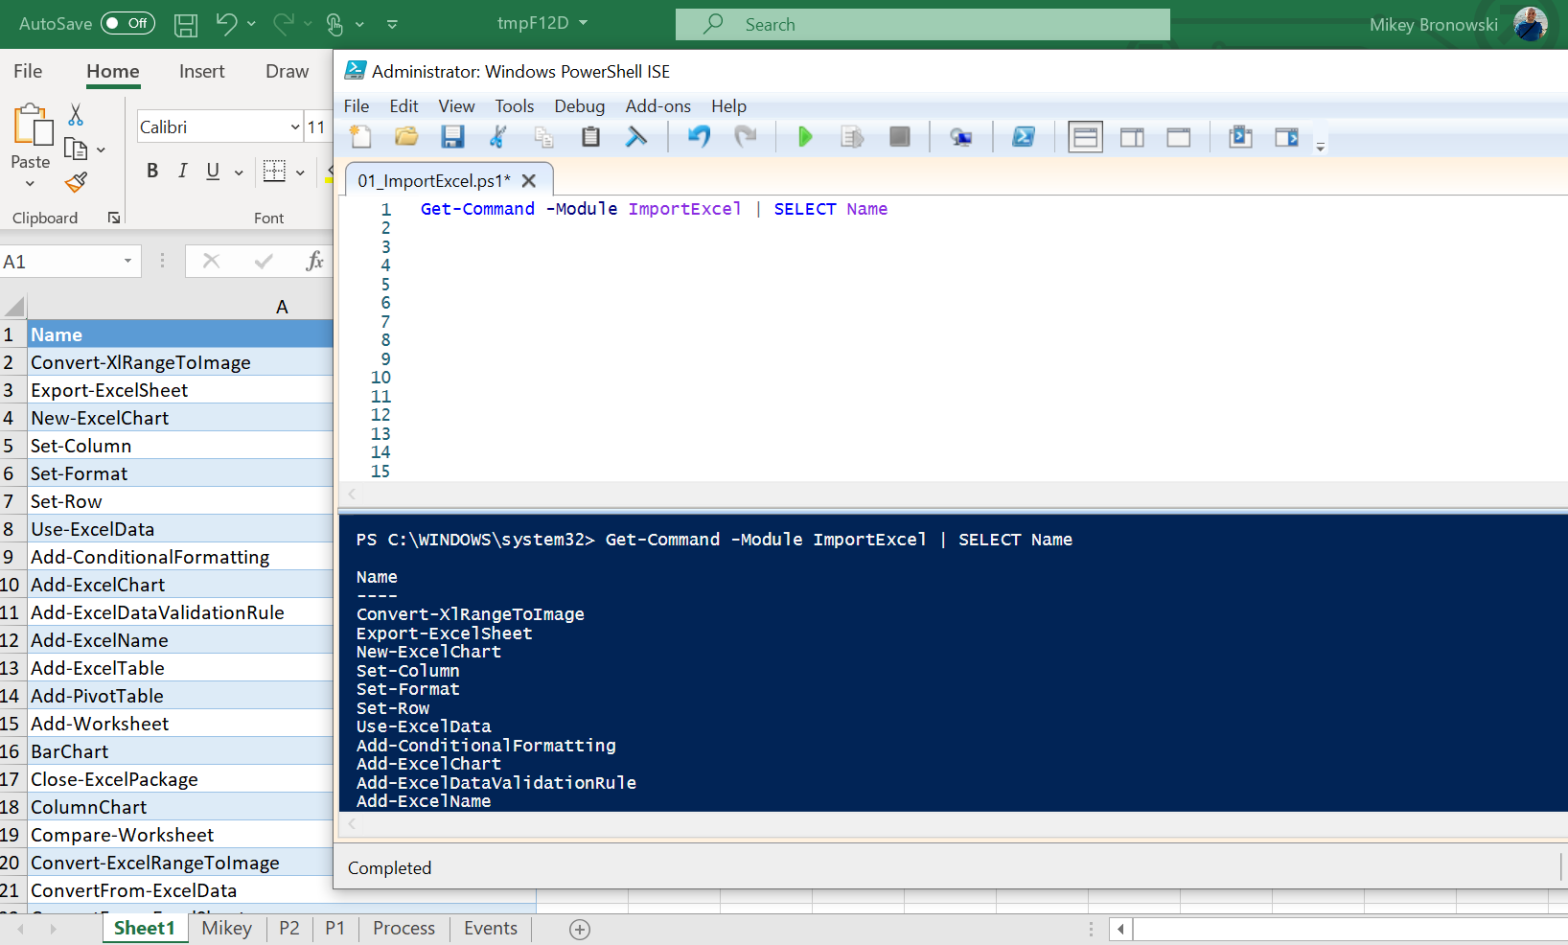 How to Excel with PowerShell (ImportExcel)?